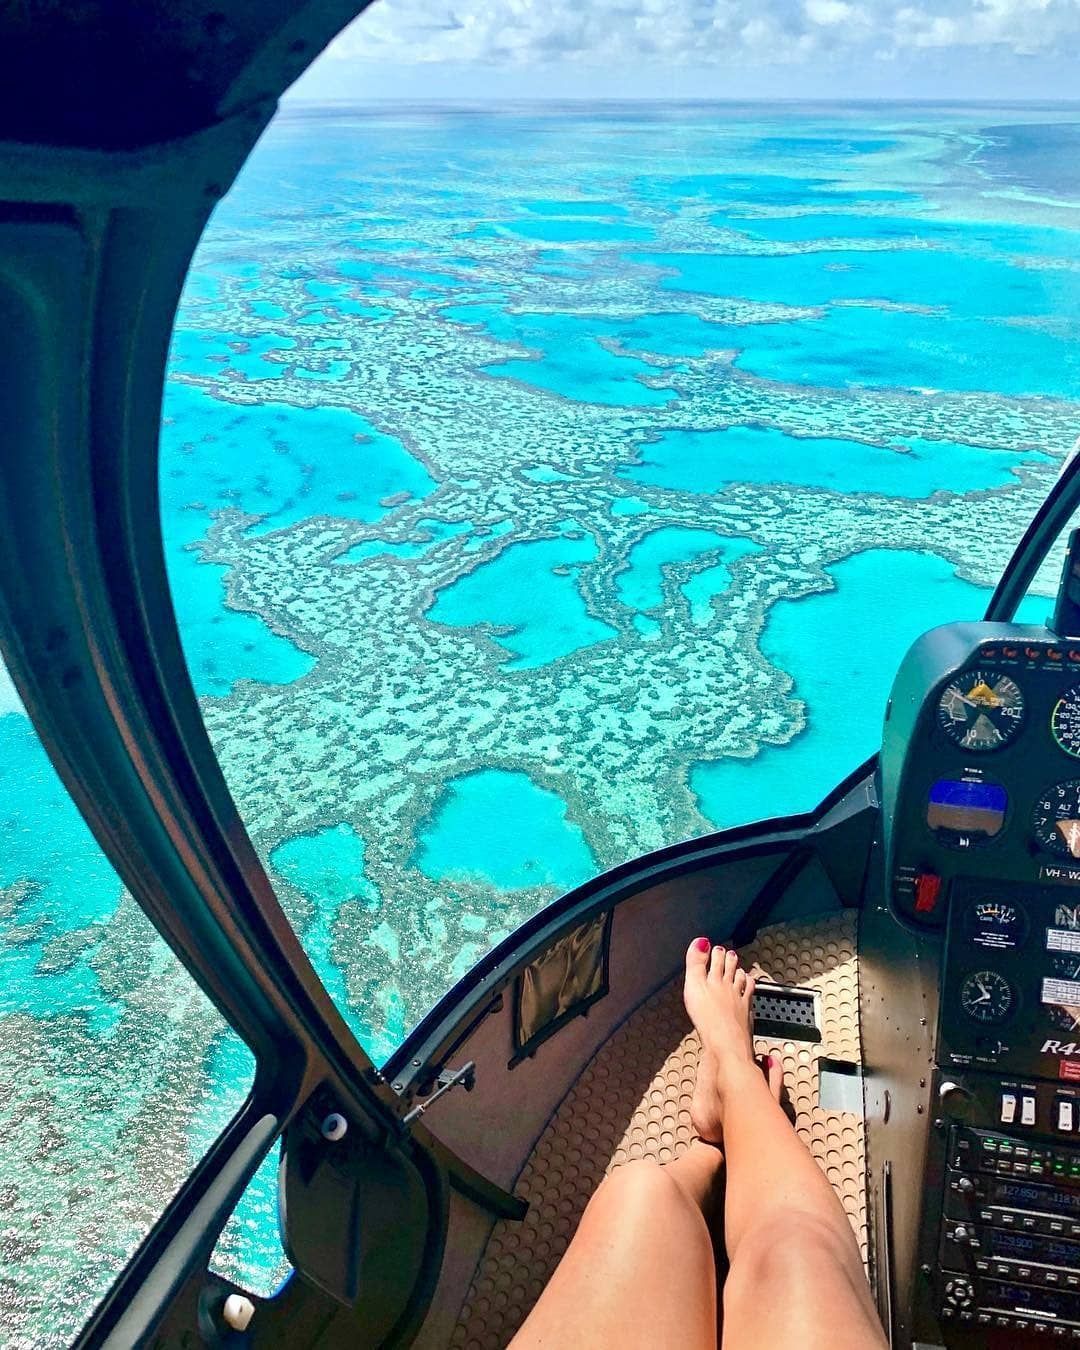 View of the Great Barrier Reef in Australia from a helicopter